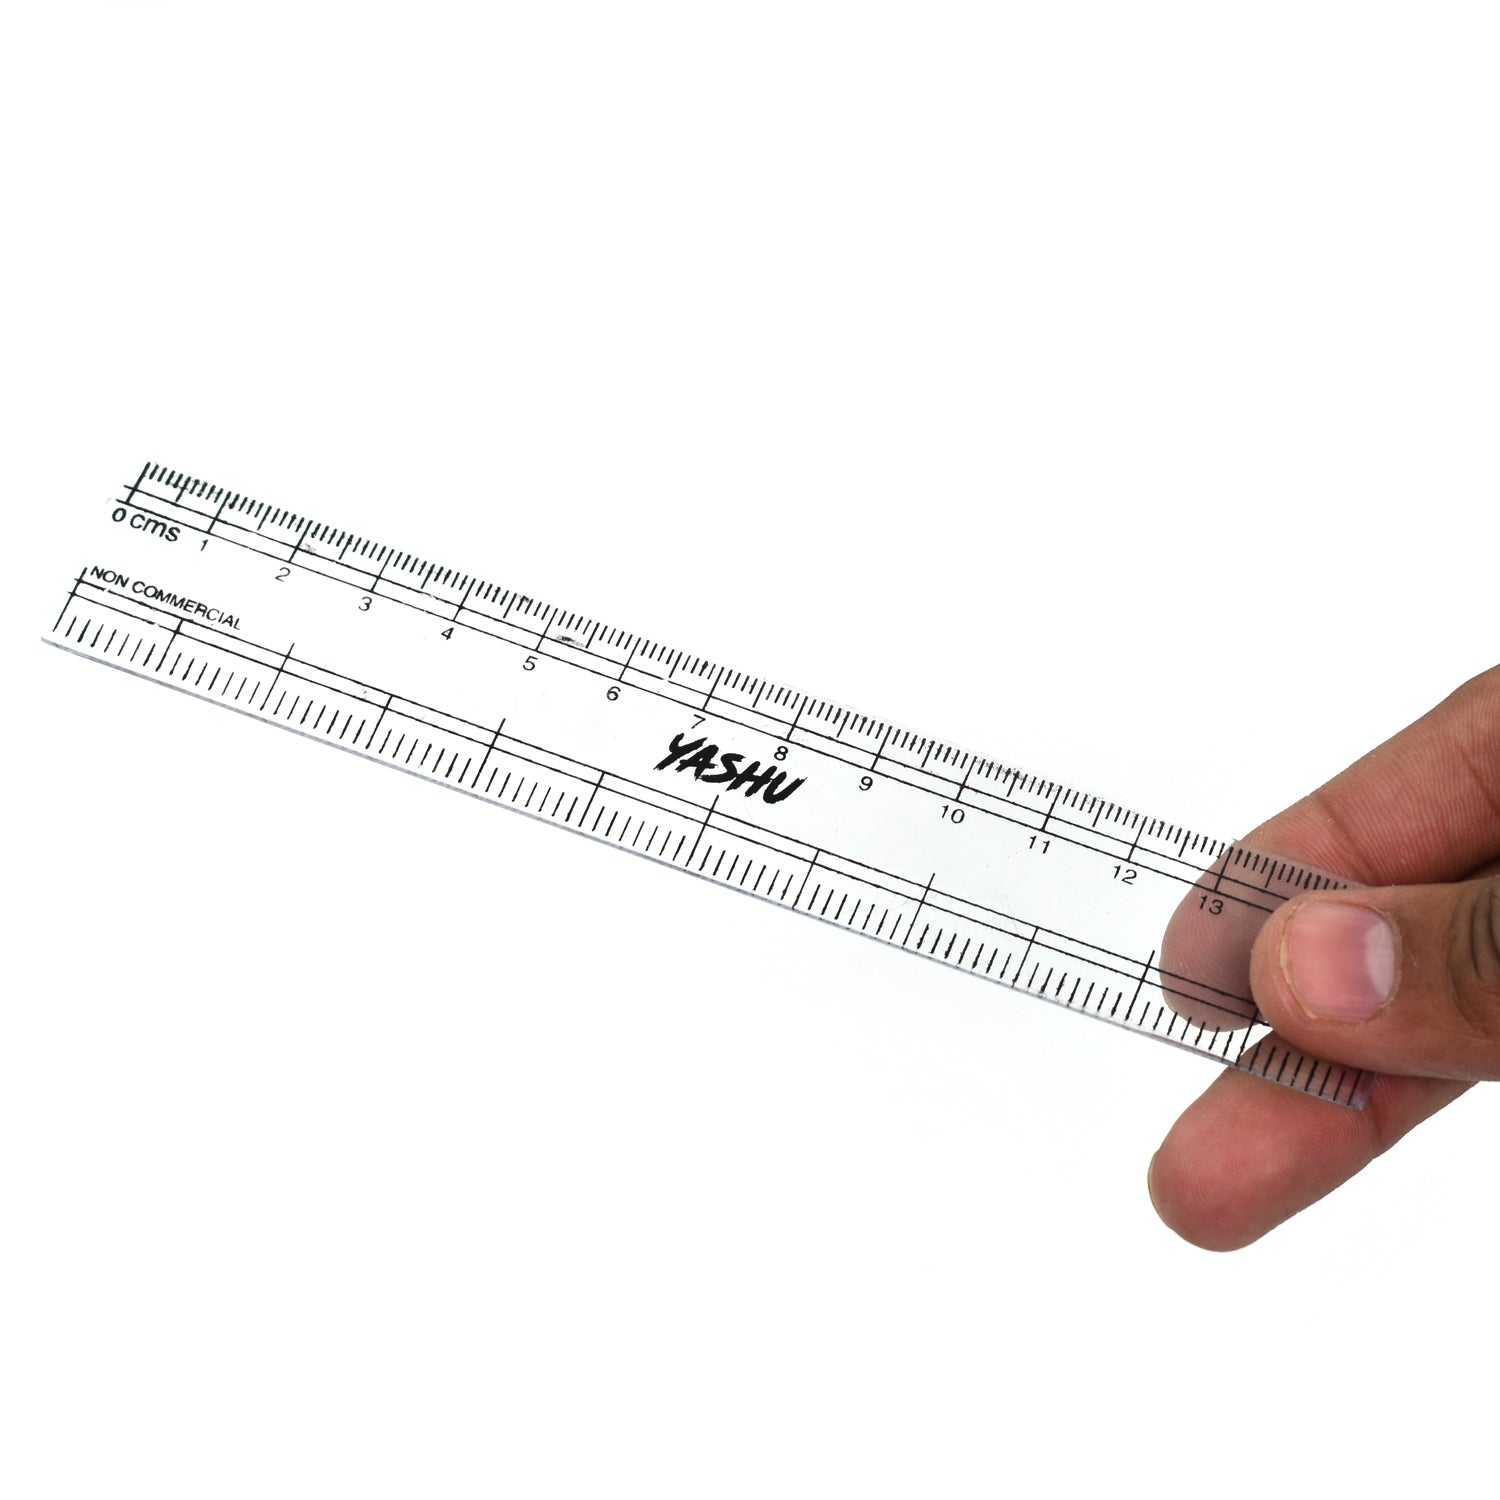 4840 15Cm Ruler For Student Purposes While Studying And Learning In Schools And Homes Etc. (1Pc) 